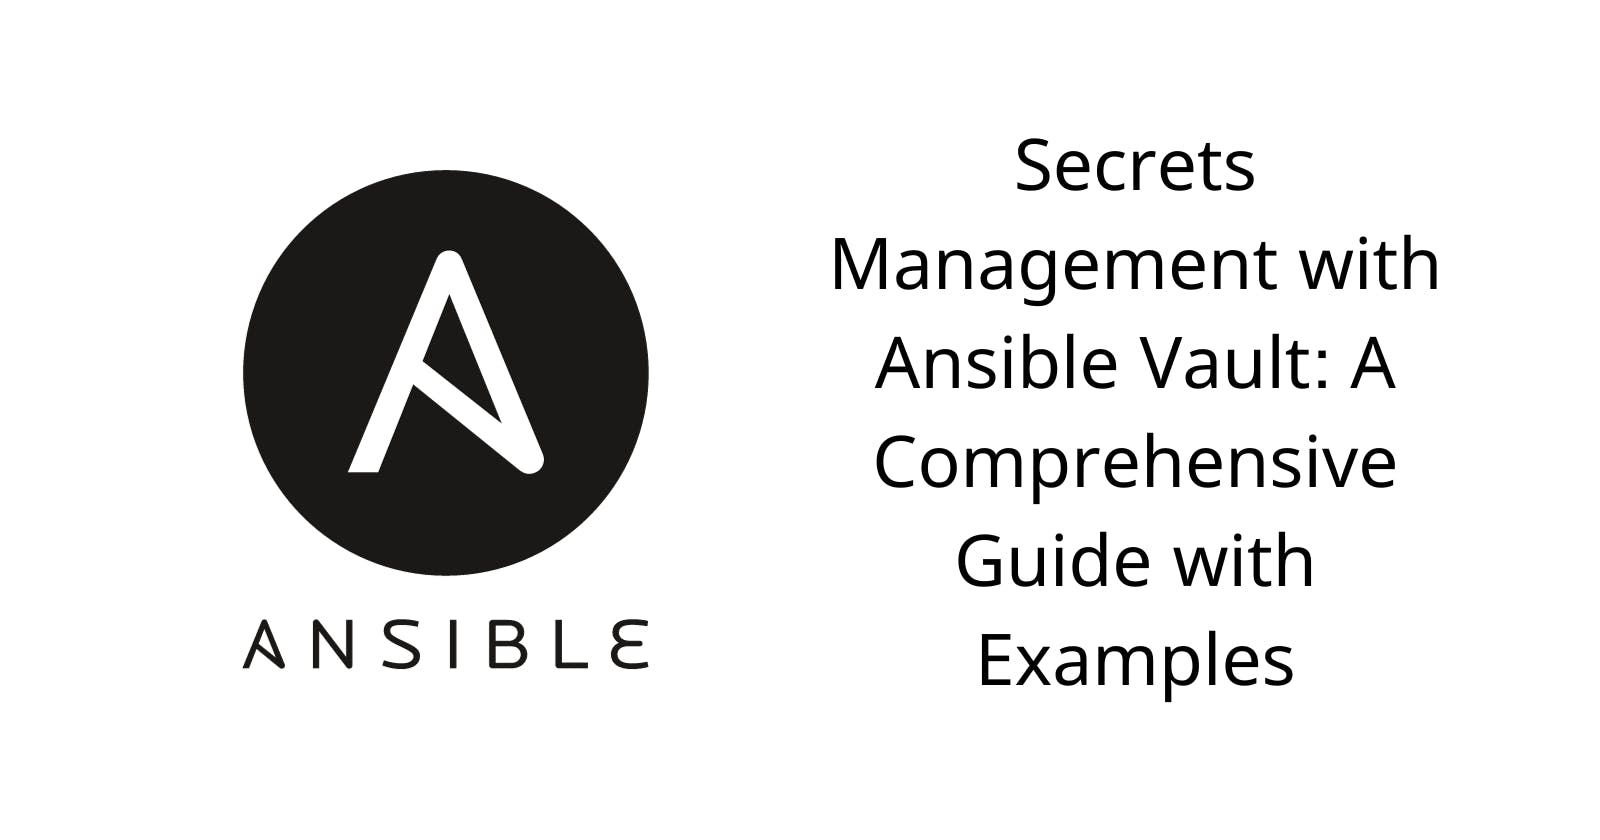 Secrets Management with Ansible Vault: A Comprehensive Guide with Examples